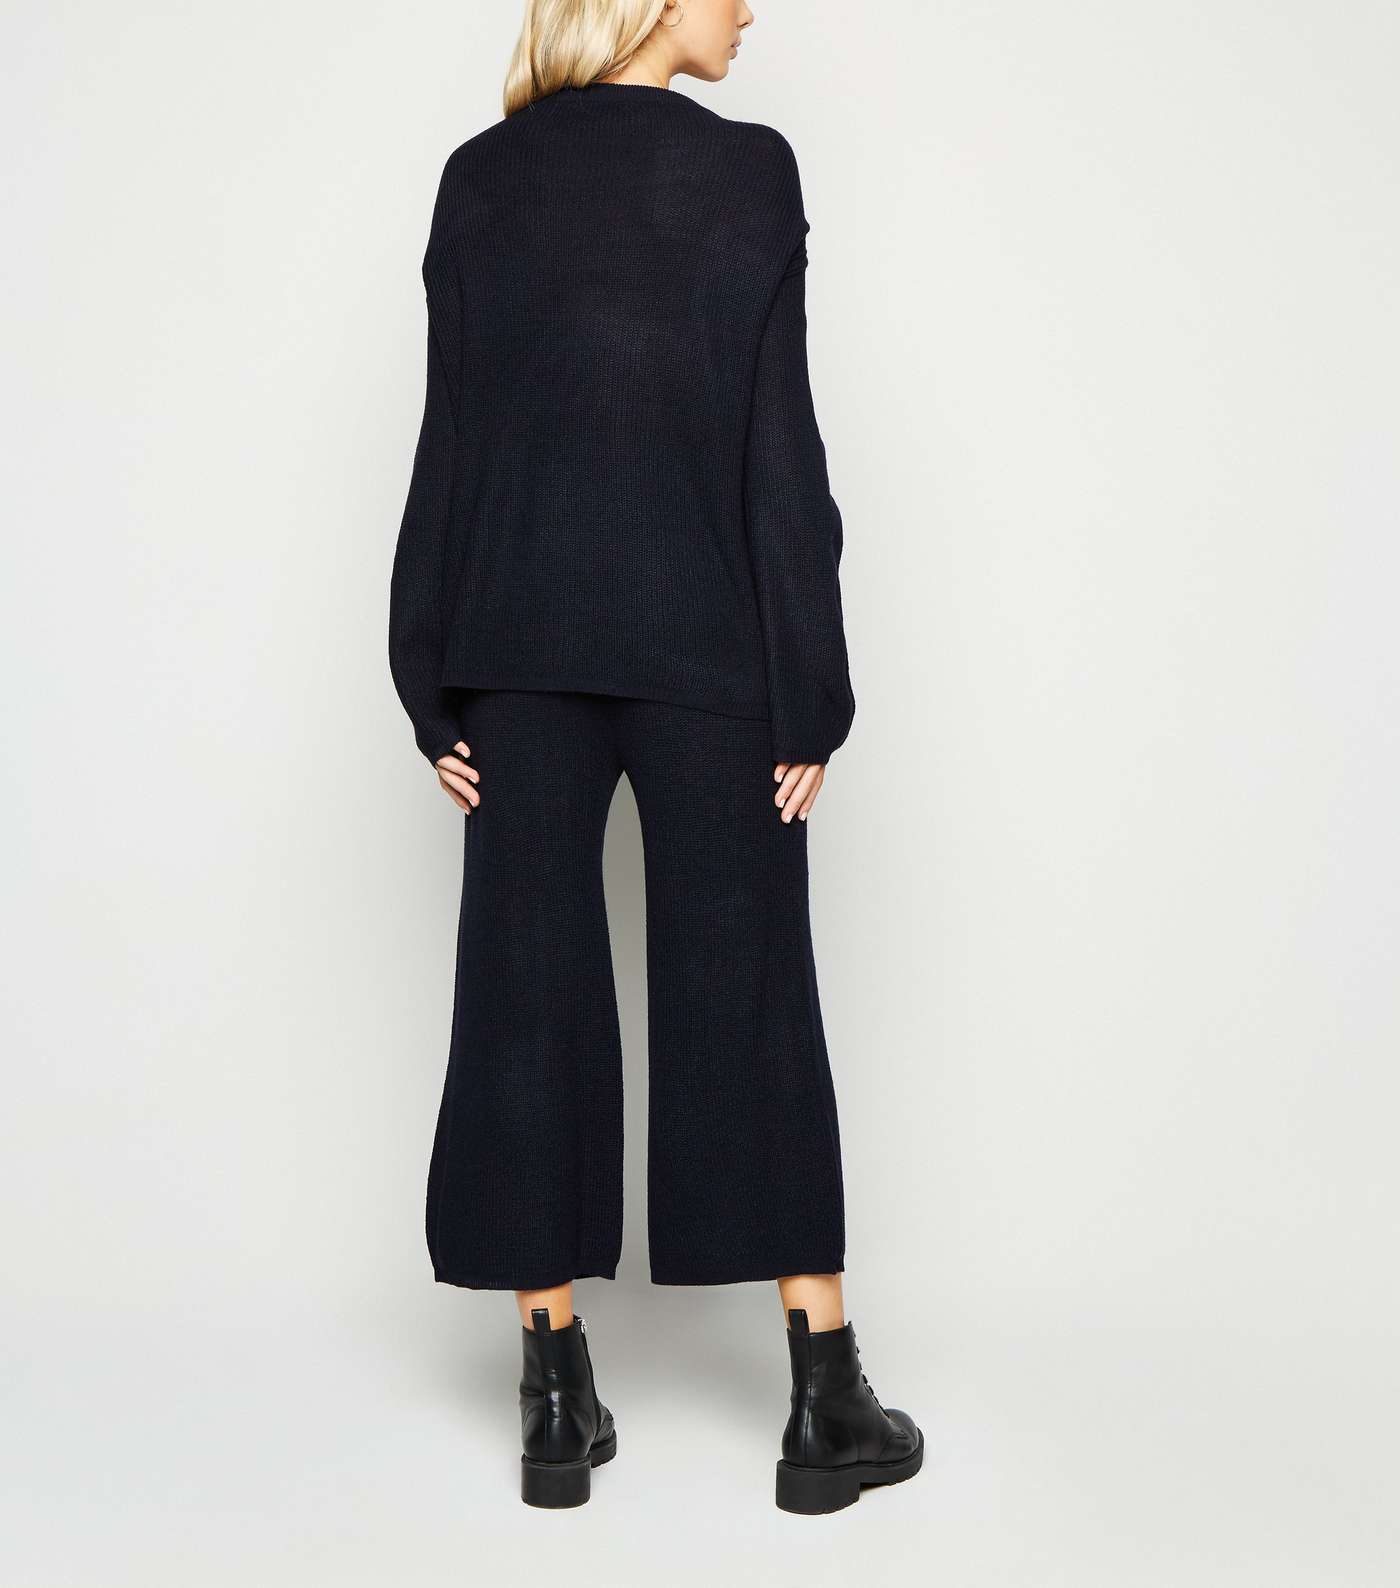 Brave Soul Navy Knit Jumper and Trousers Set Image 2